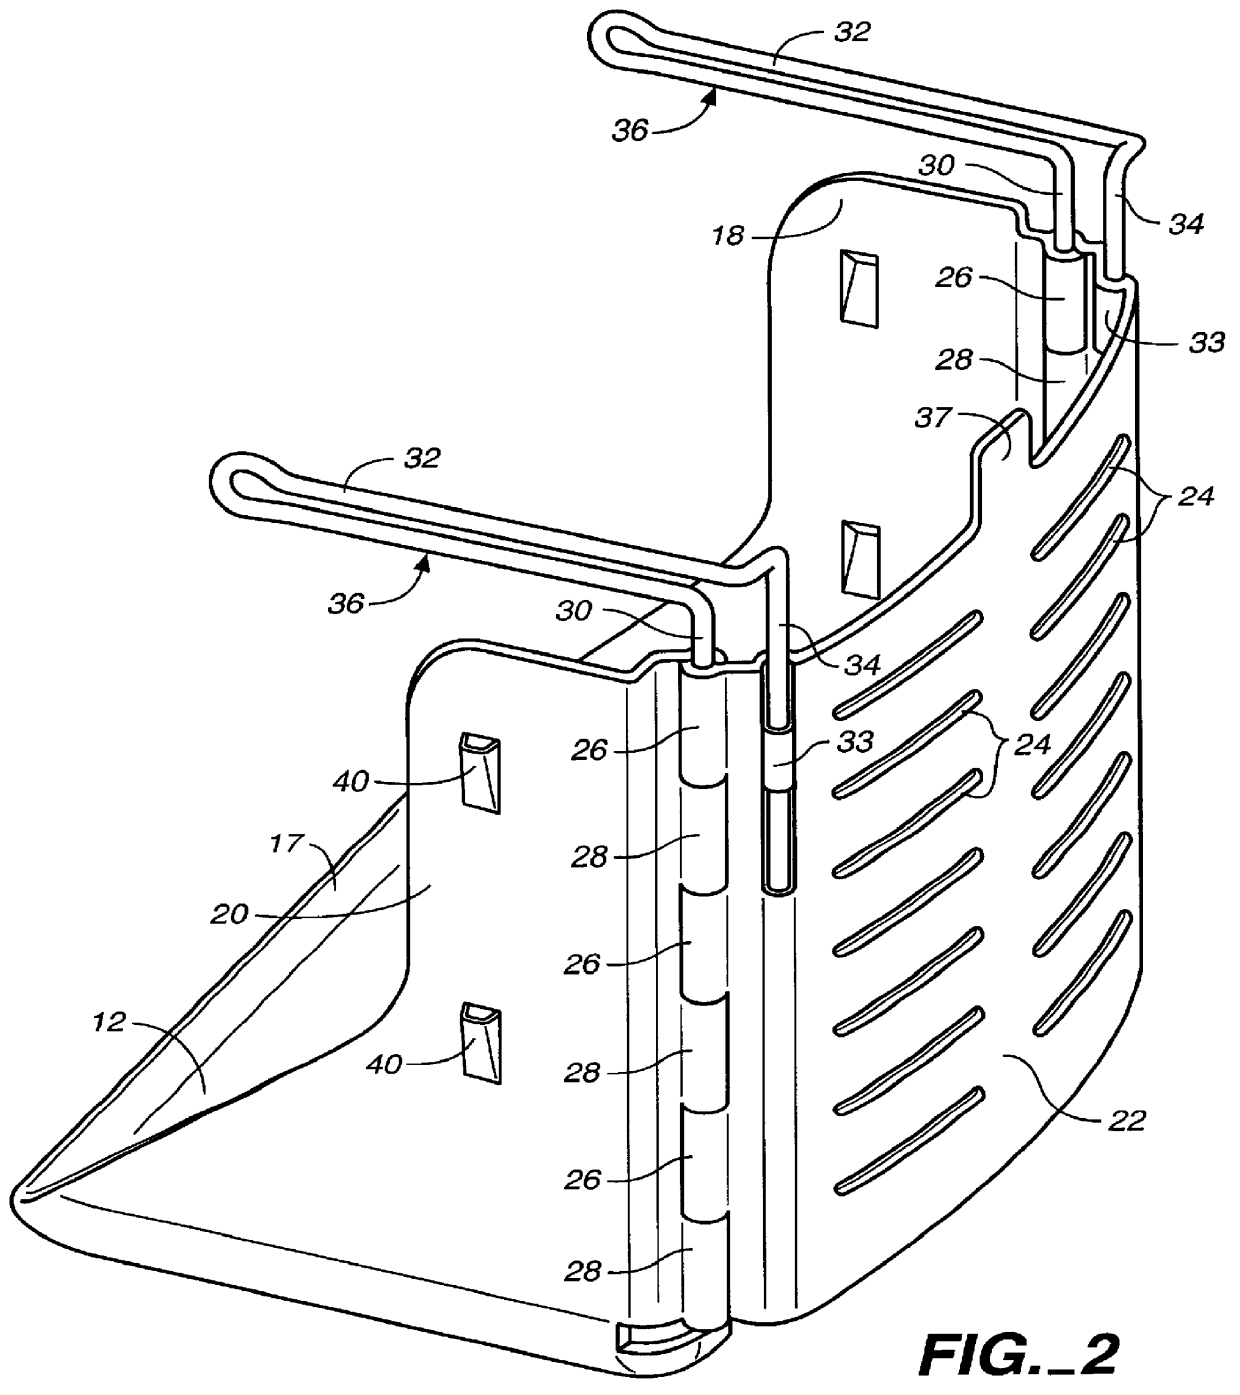 T-shirt bag rack with cantilevered bag support arms and method